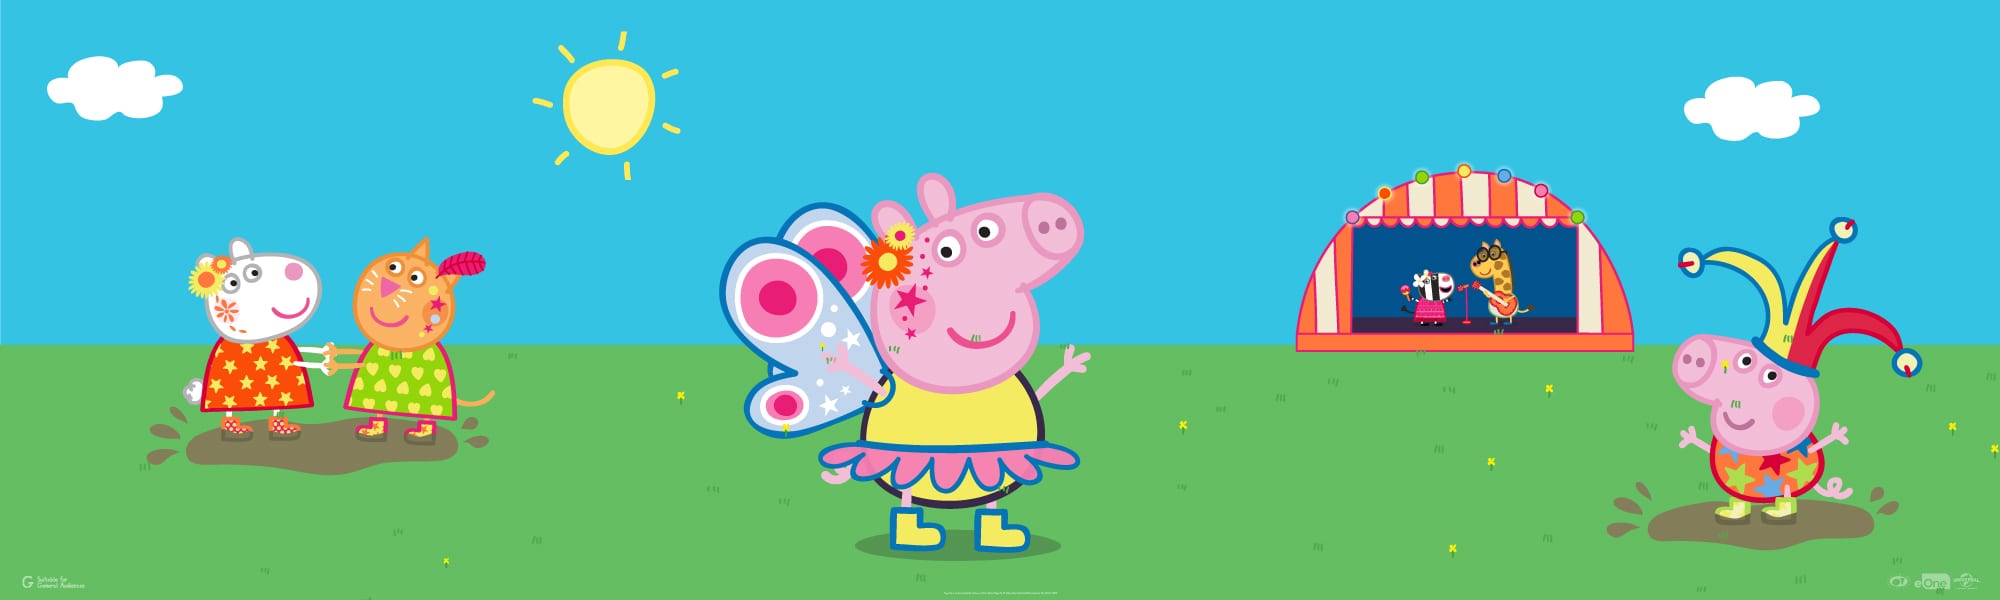 Peppa Pig: Festival of Fun - AUCKLAND FOR KIDS